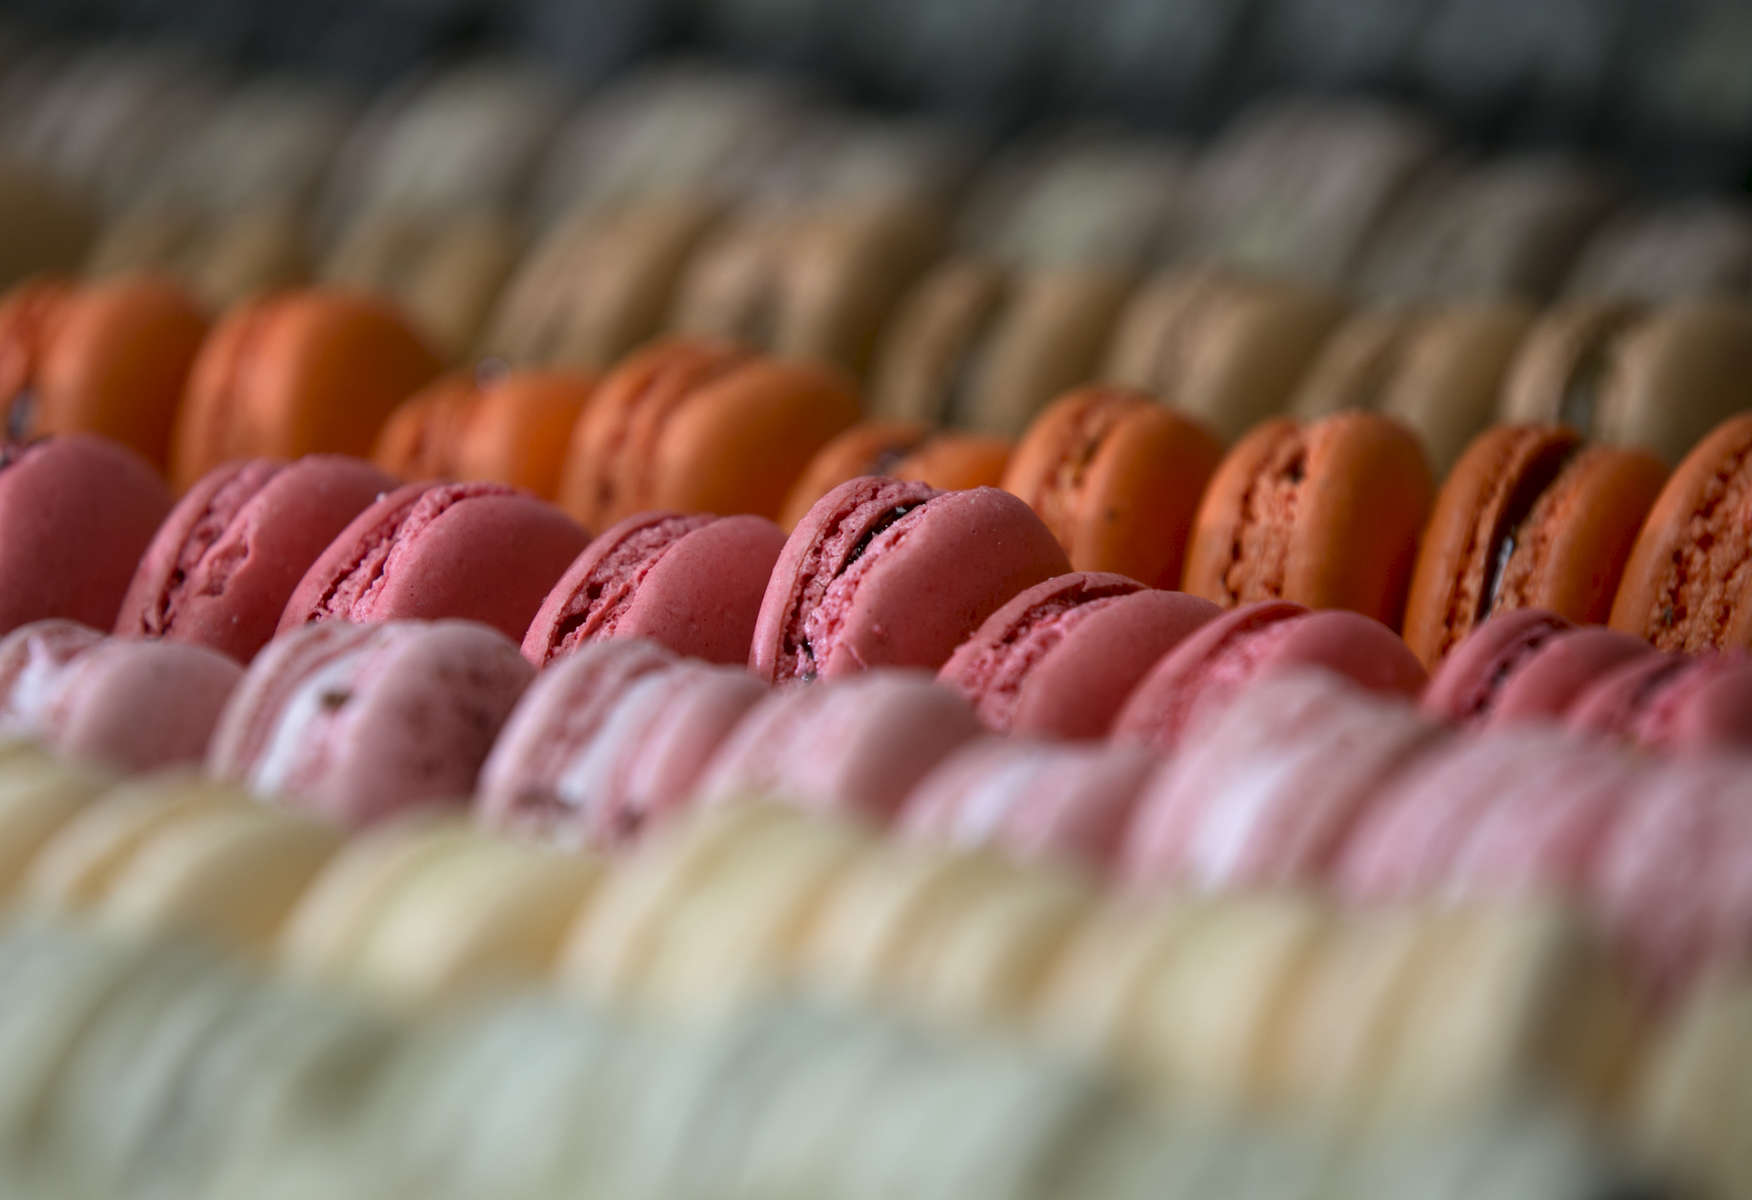 Nuvrei's Mac Bar in Portland, located a level below the cafe, displays their outstanding variety of macarons. 